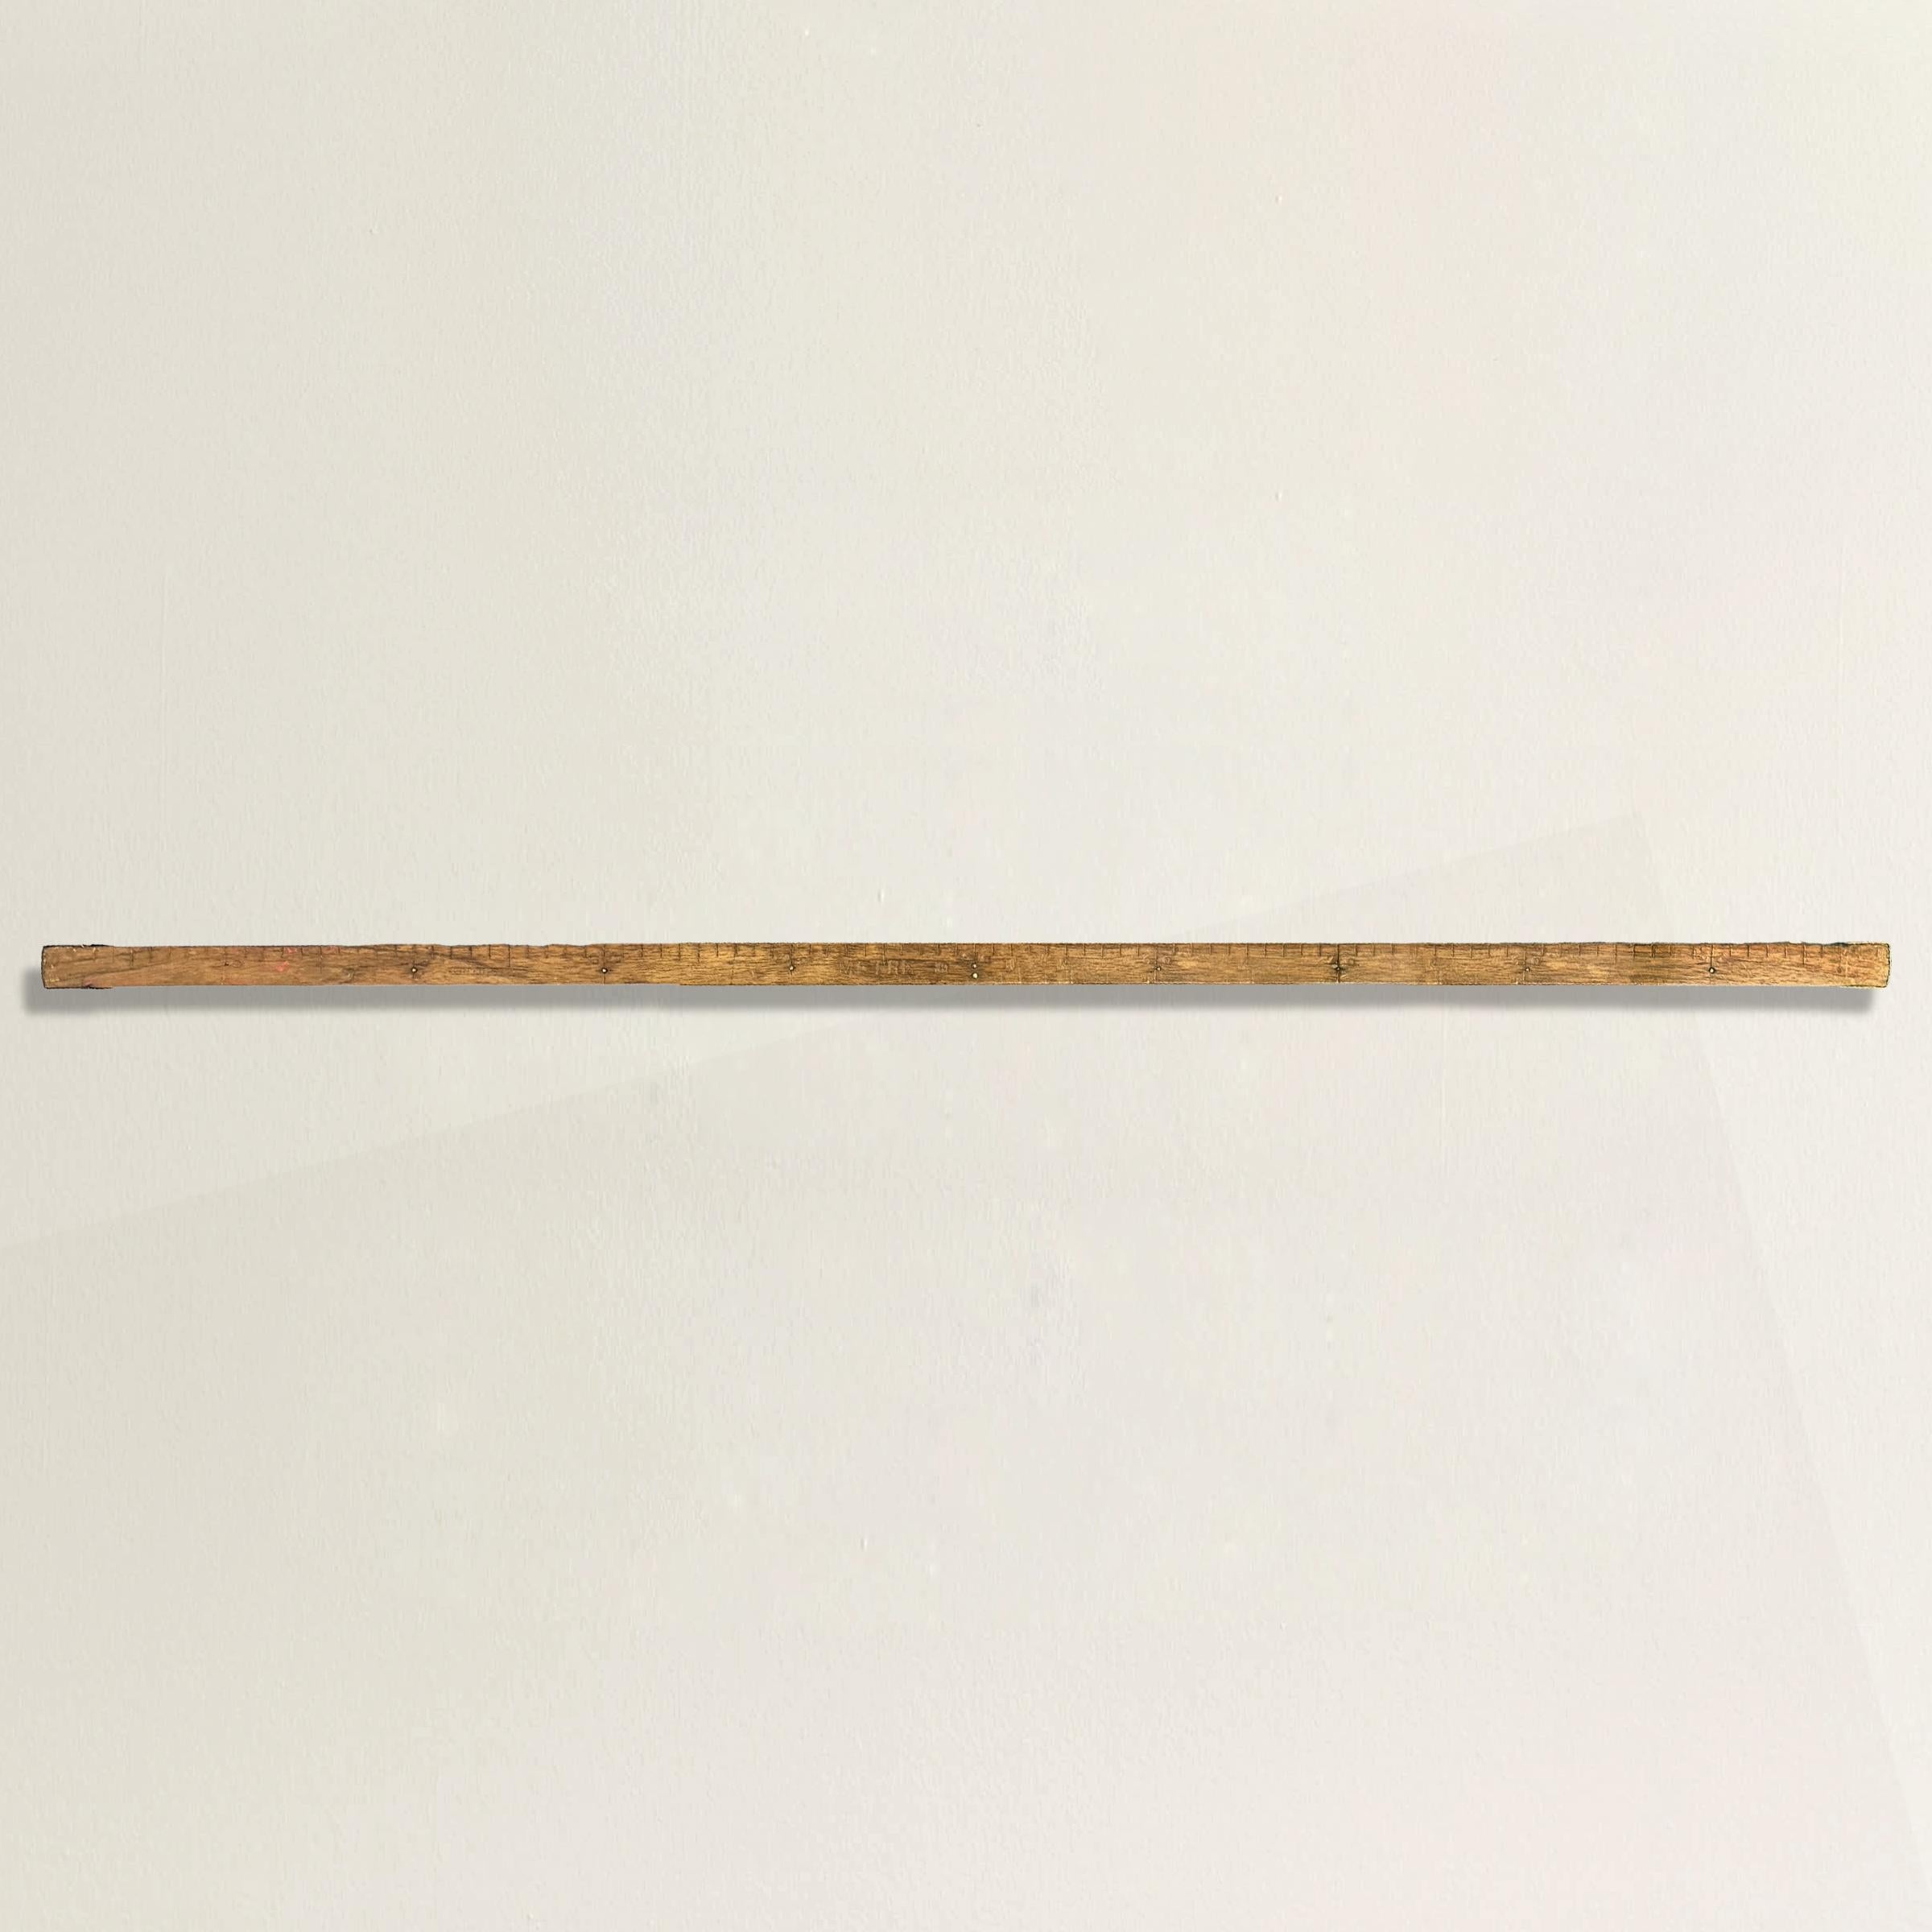 Dating back to the 19th century, this French tailor's maple and brass measuring meterstick is a rare and special piece from France's famed fashion industry. Used to measure fabrics by the meter in centimeters, this meterstick is marked with